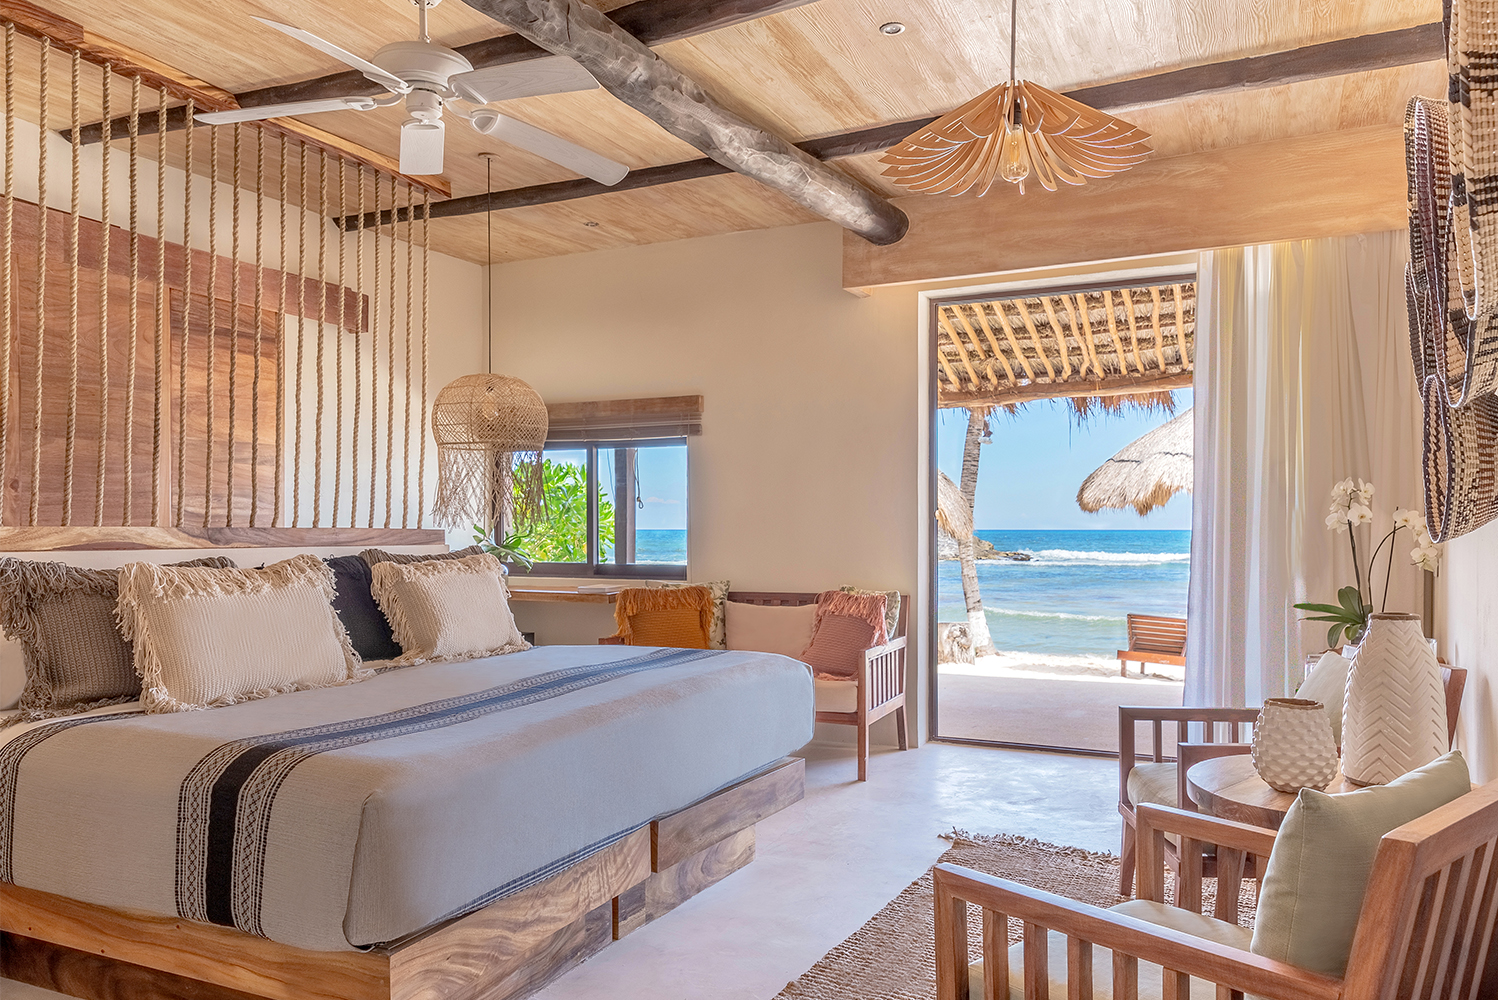 El Pez a beachfront hotel in Tulum Mexico opened two on-the-beach rooms with plunge pools that may be heated 